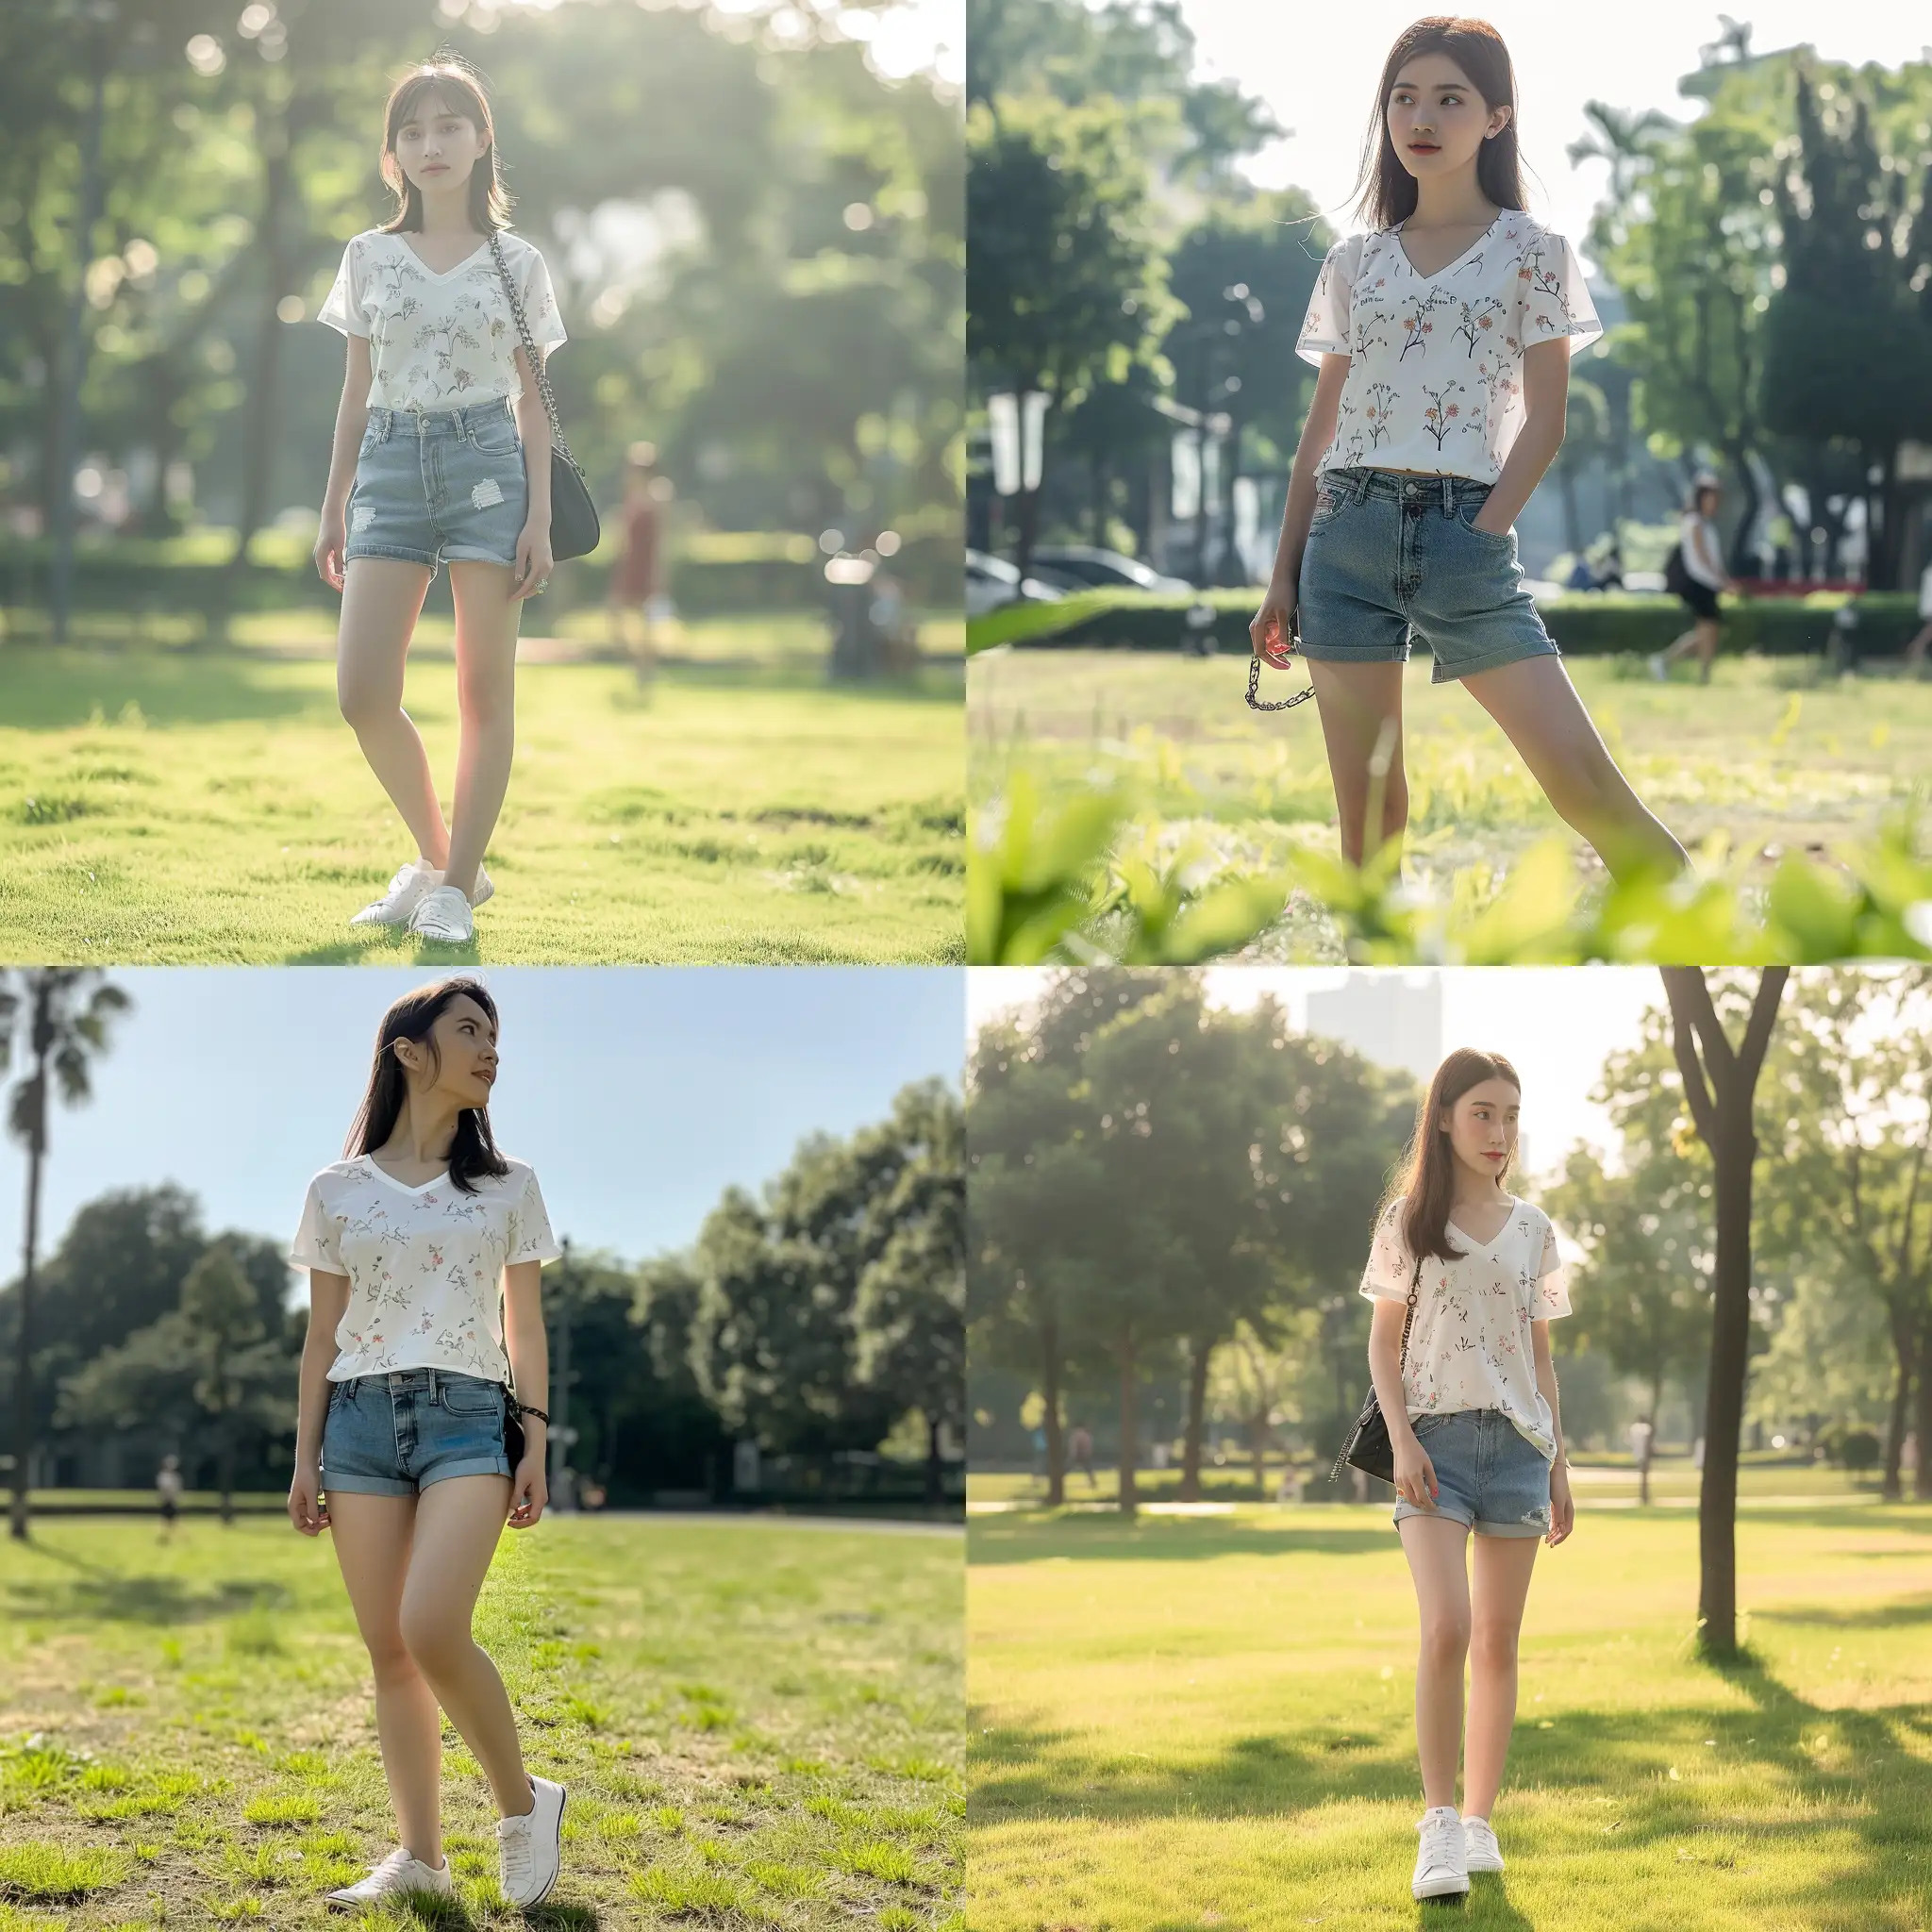 Youthful-Girl-in-Floral-TShirt-and-Denim-Shorts-Walking-Under-Sunlight